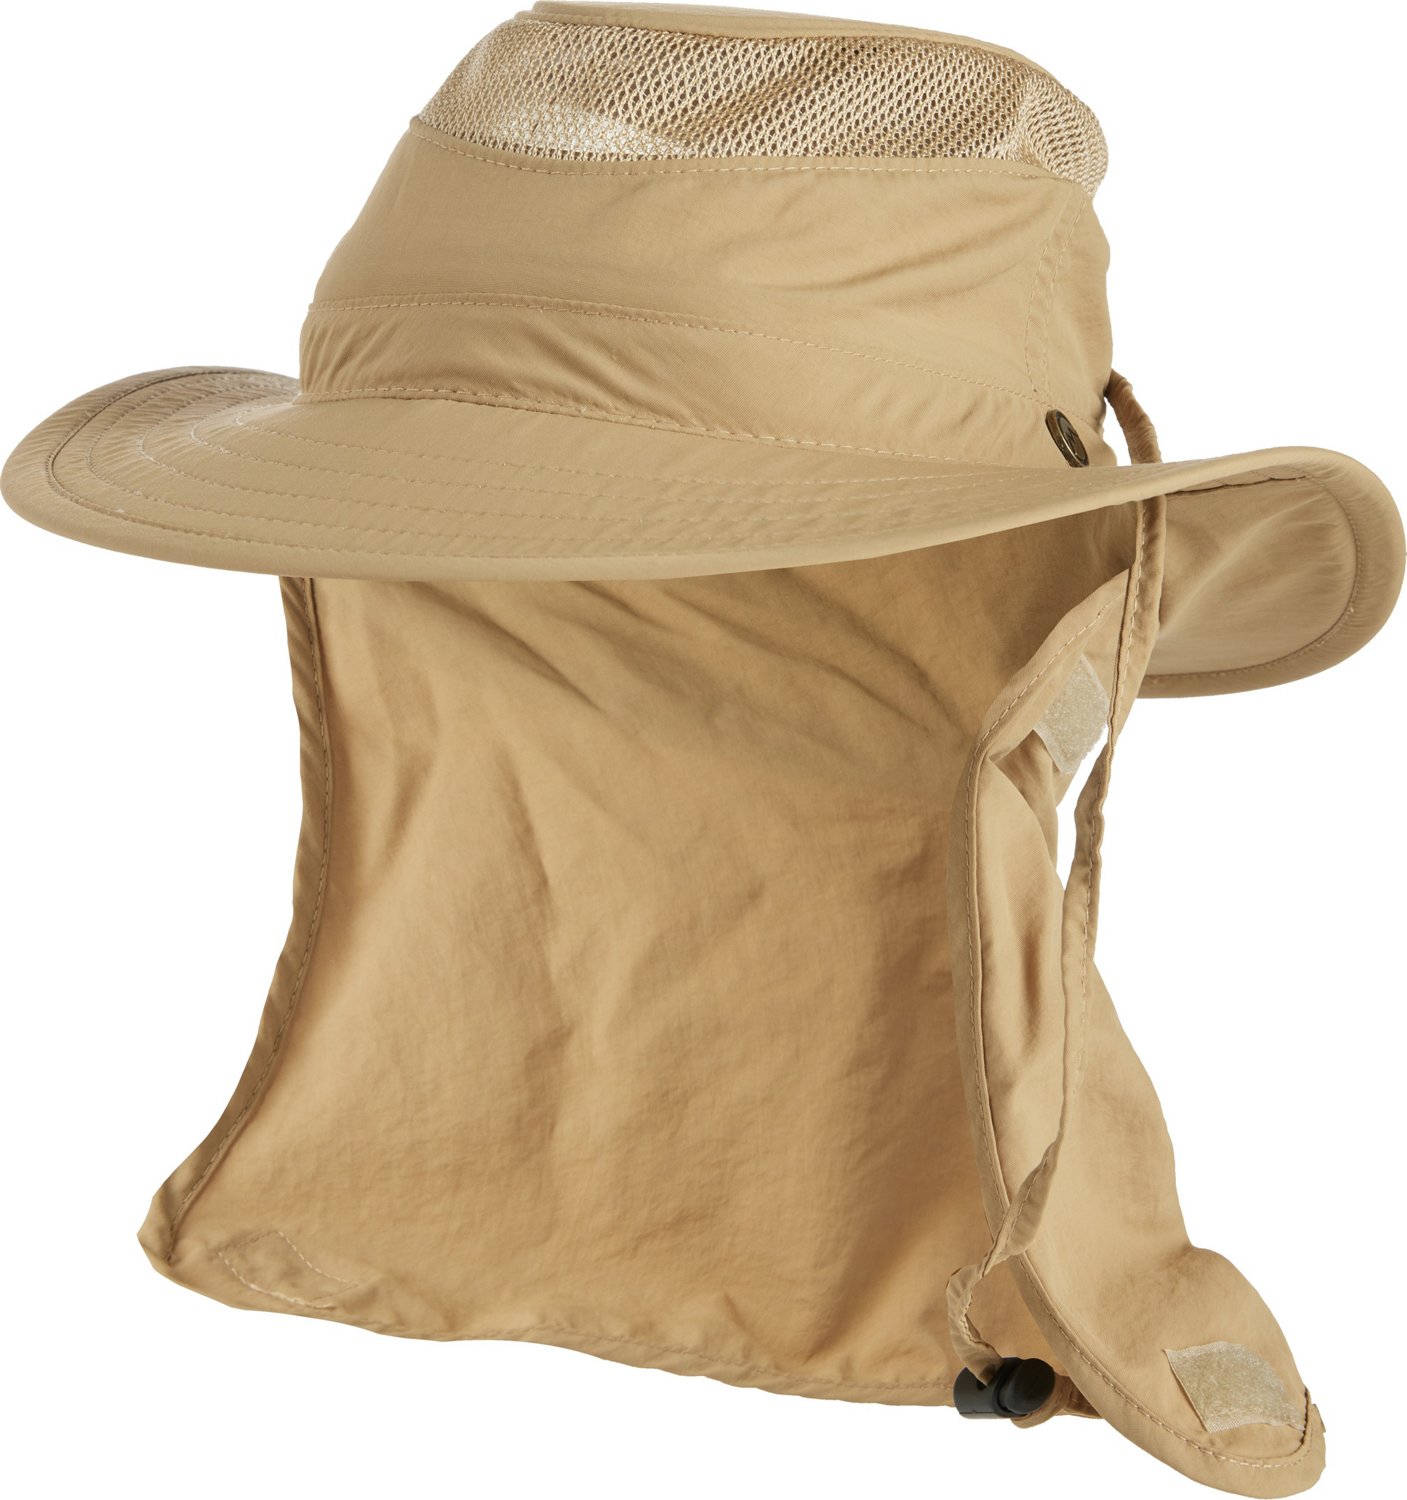 Magellan Outdoors Men's Boating Boonie Hat with Shield